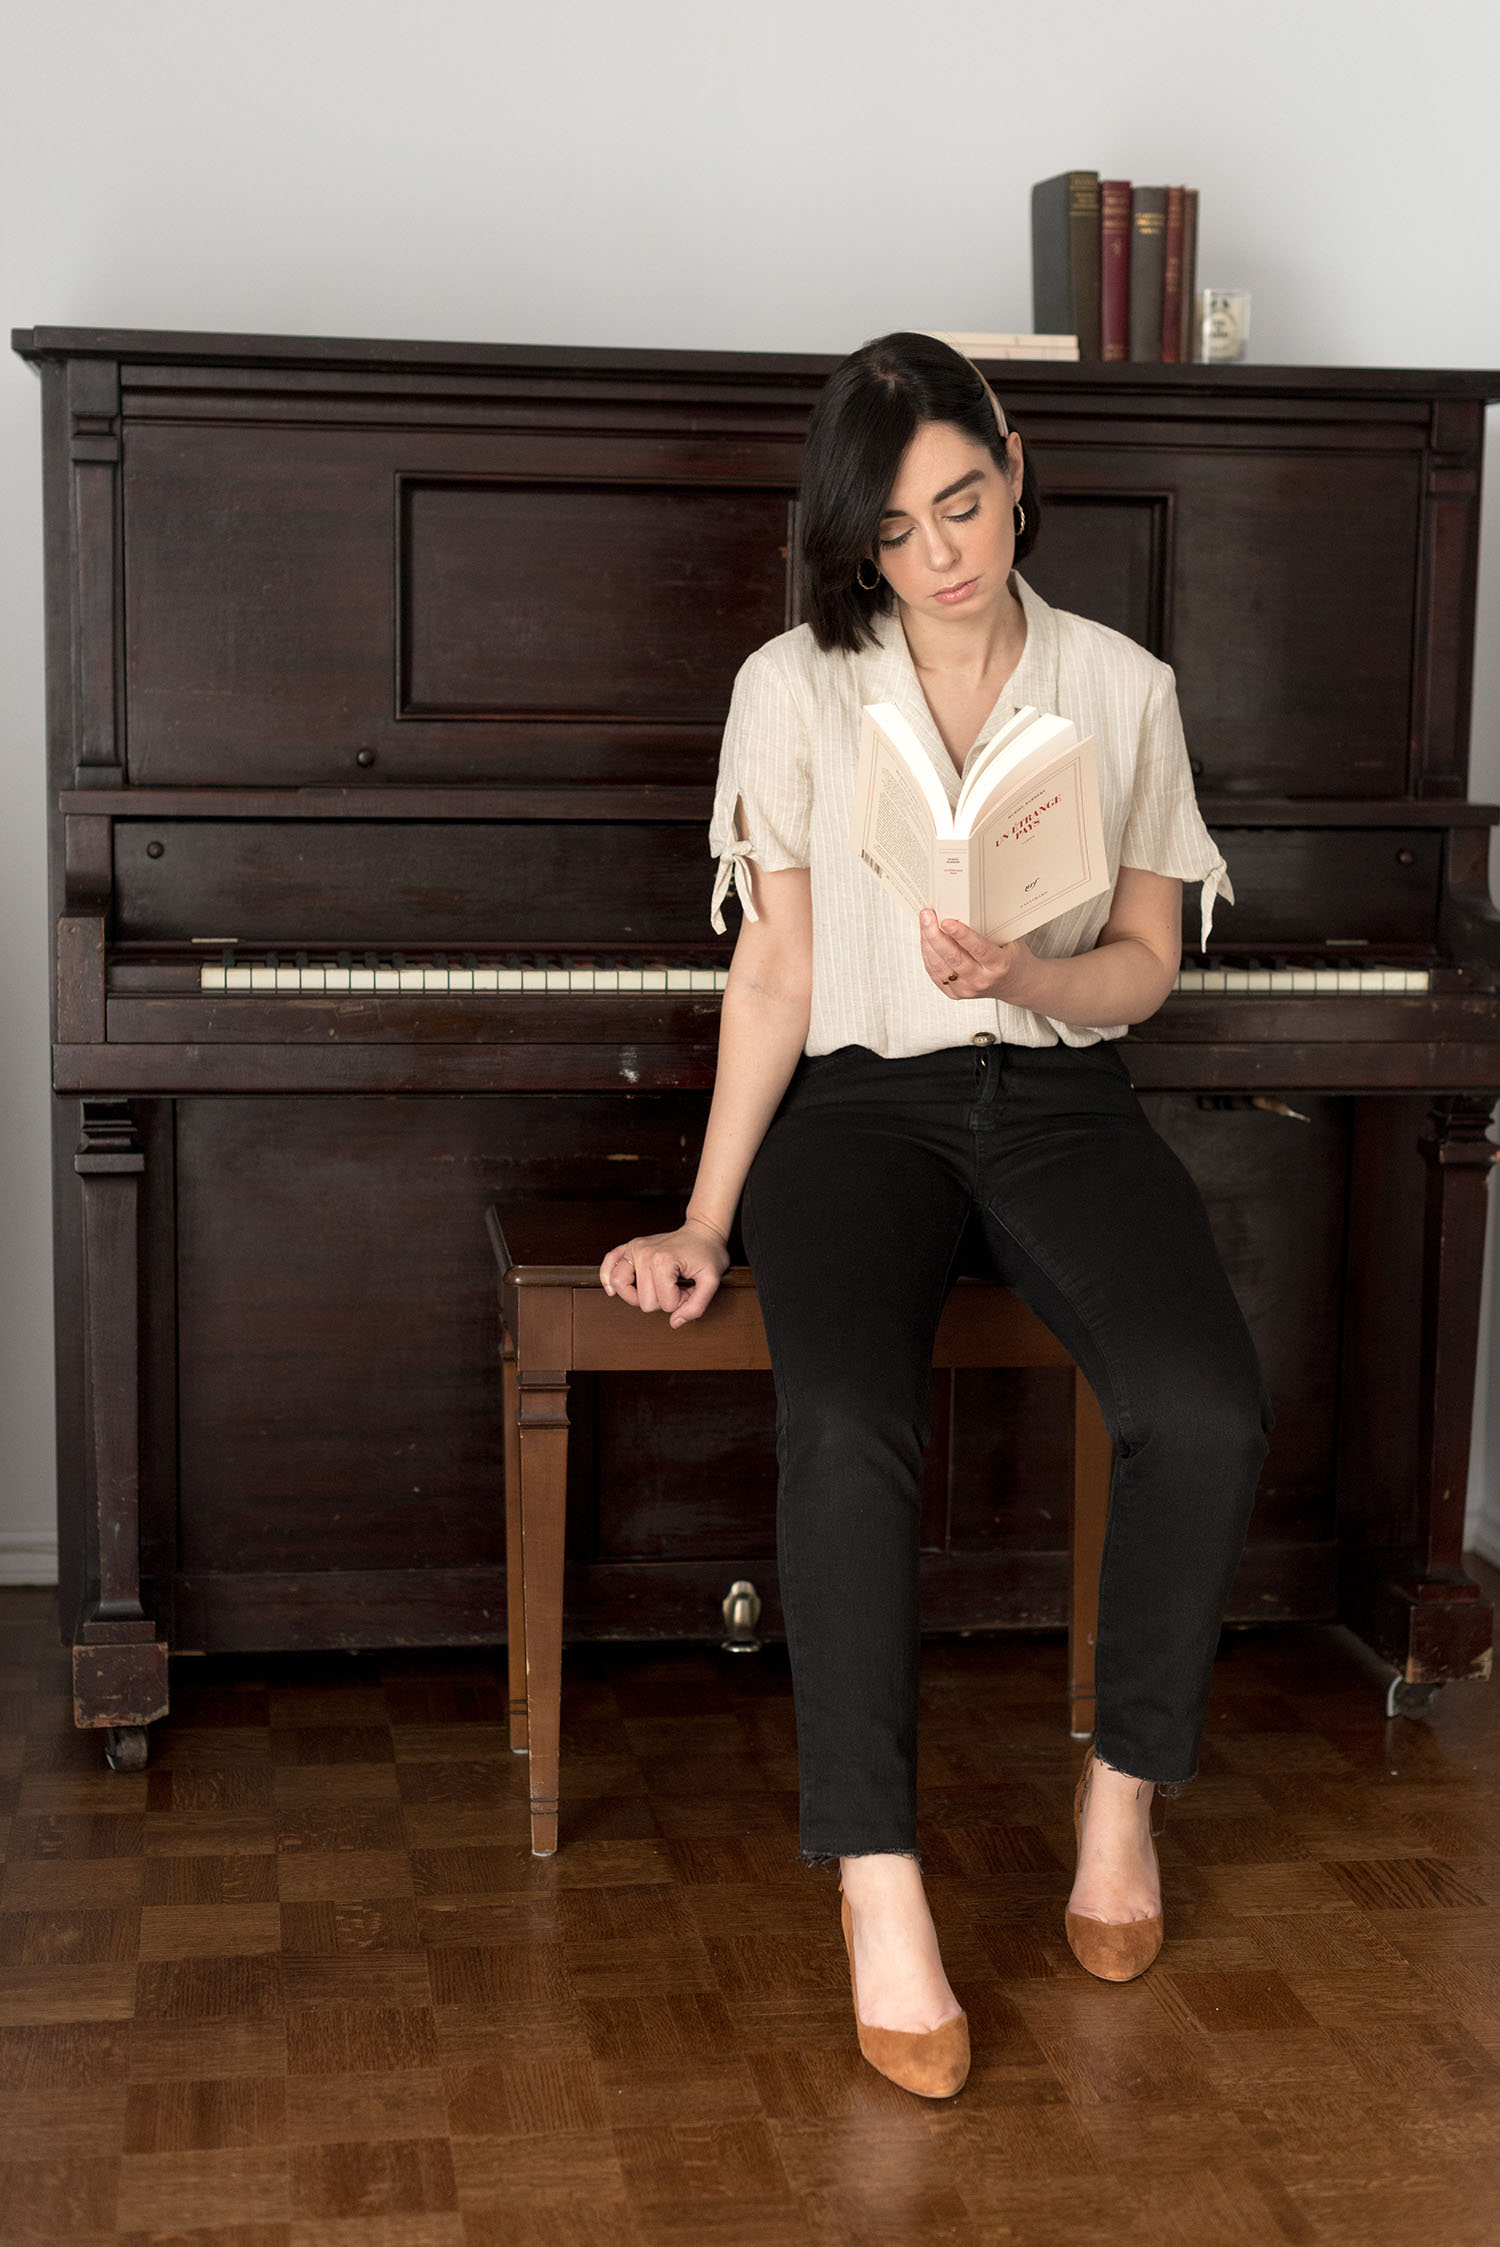 Top Winnipeg fashion blogger Cee Fardoe of Coco & Vera sits in front of a piano wearing Sezane heels and a Mango blouse